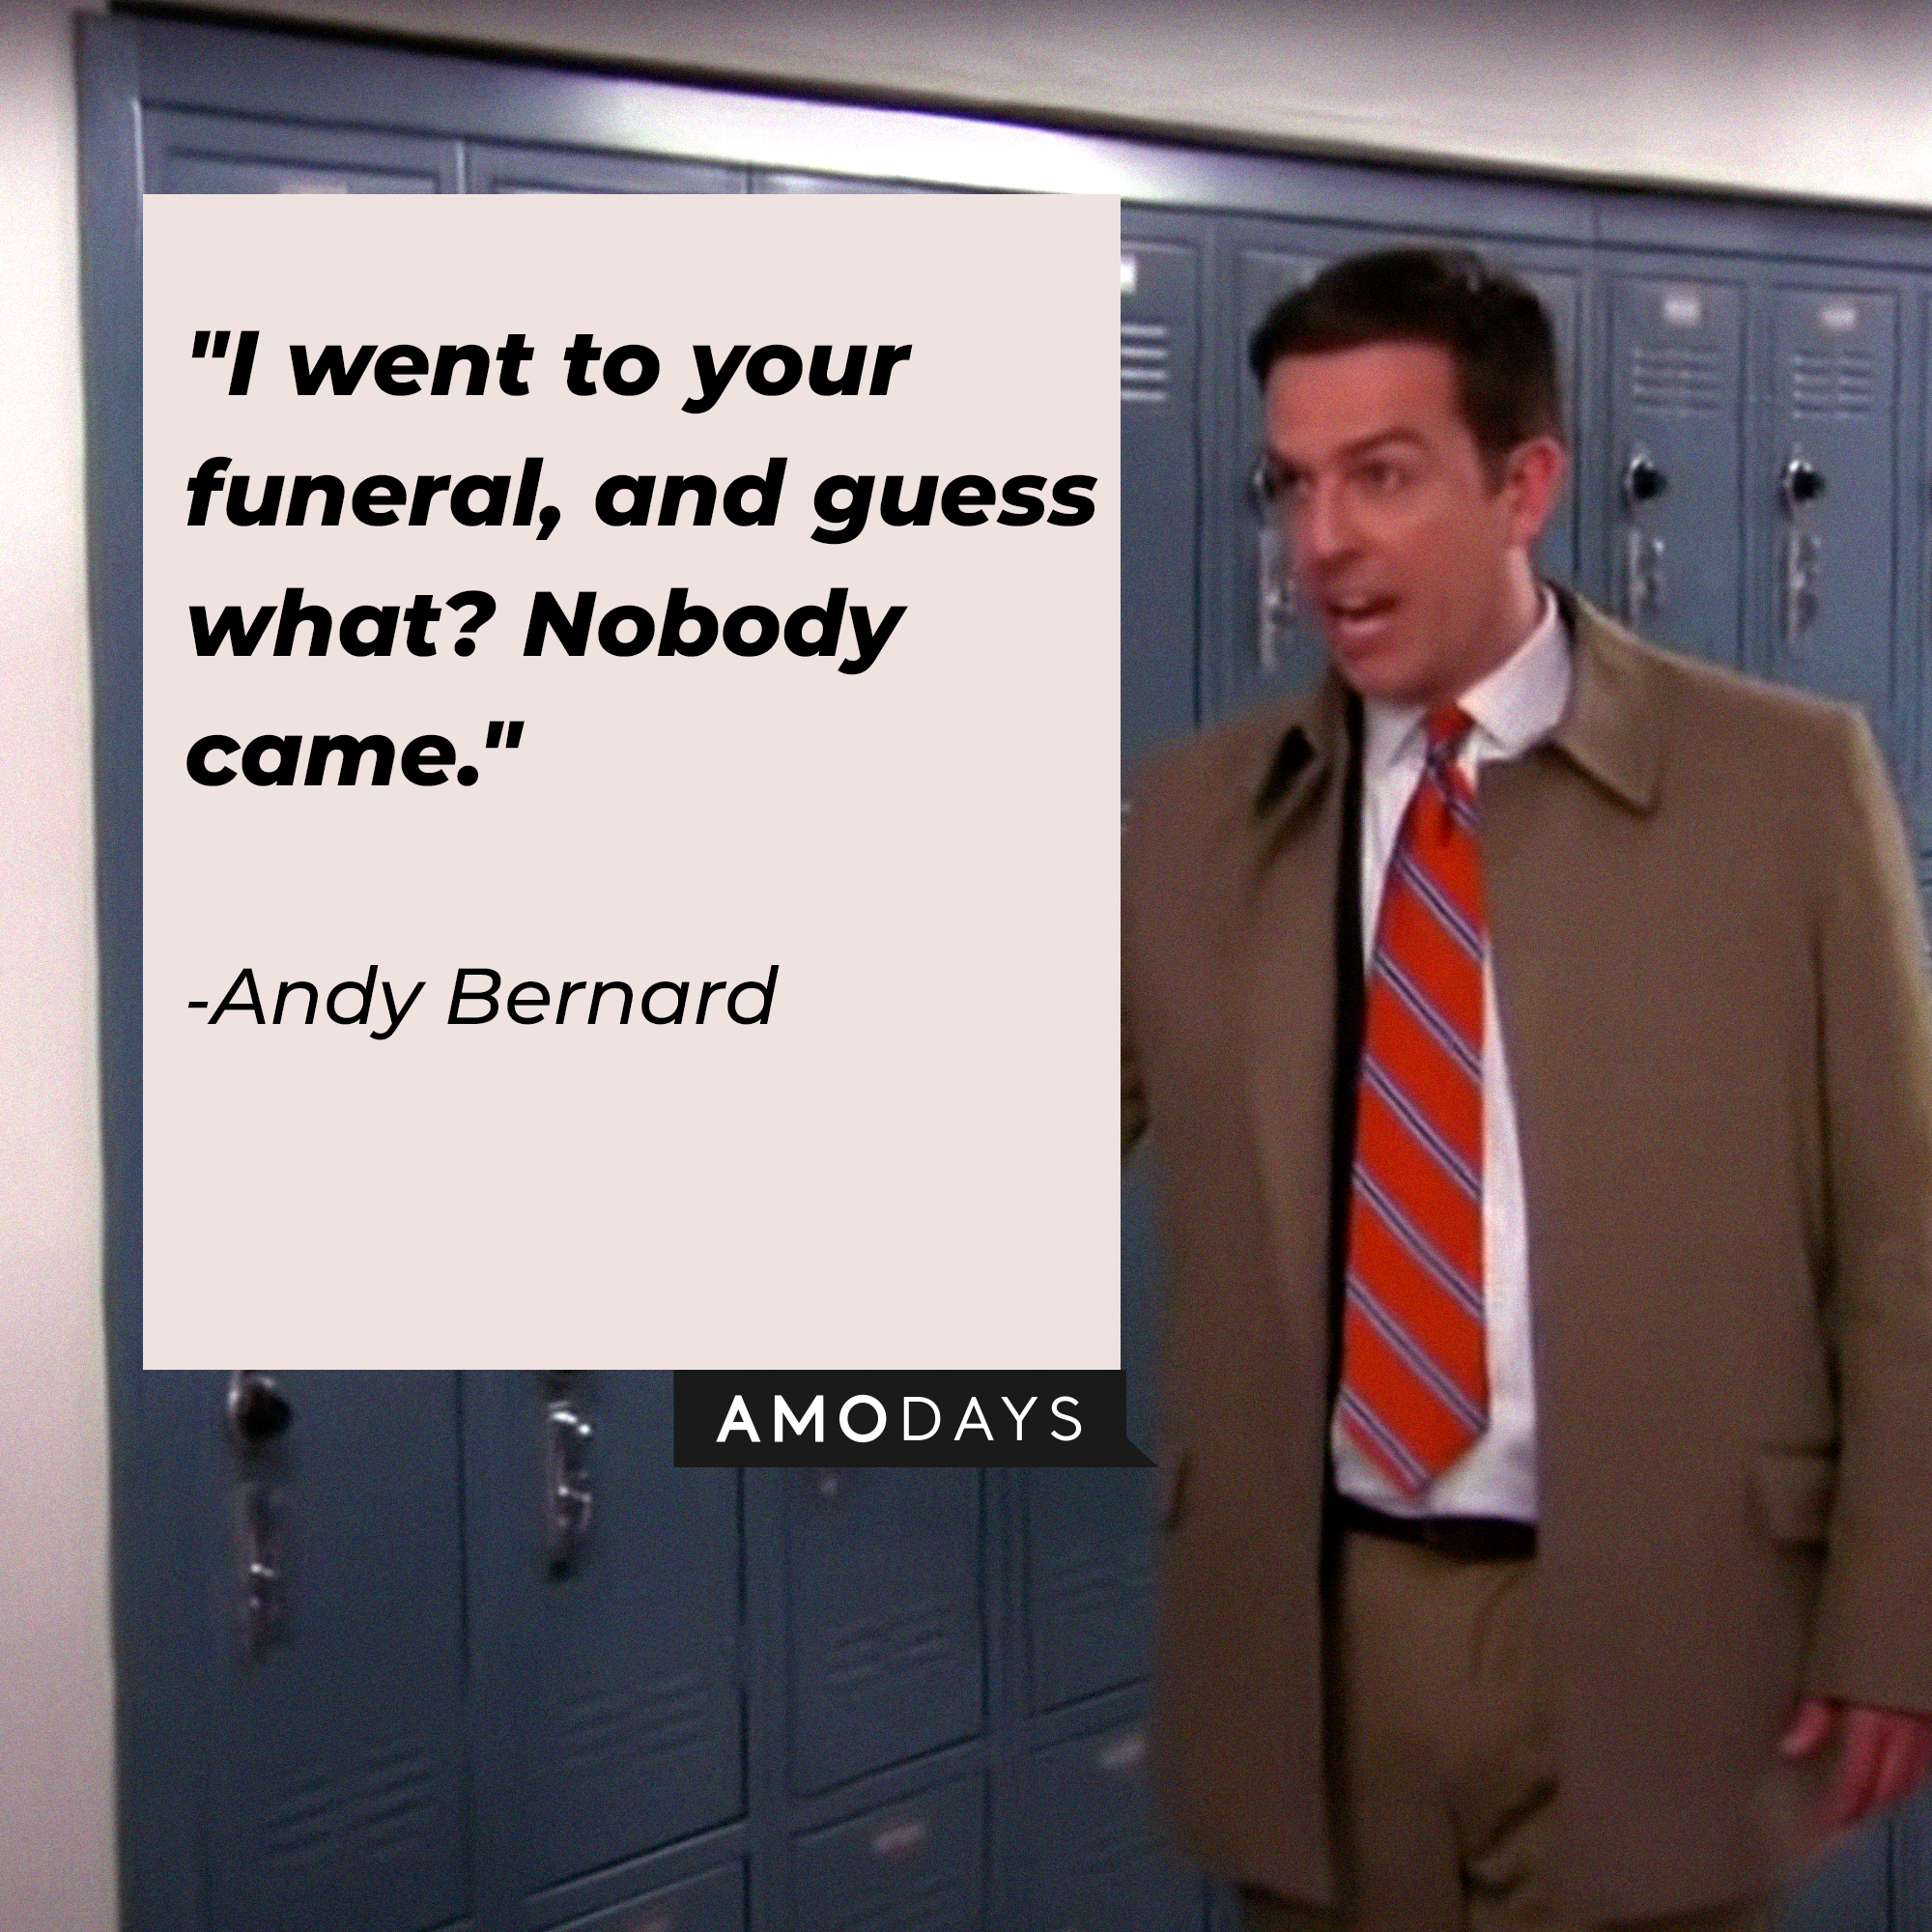 Andy Bernard, with his quote: “I went to your funeral, and guess what? Nobody came." │ Source: youtube.com/TheOffice